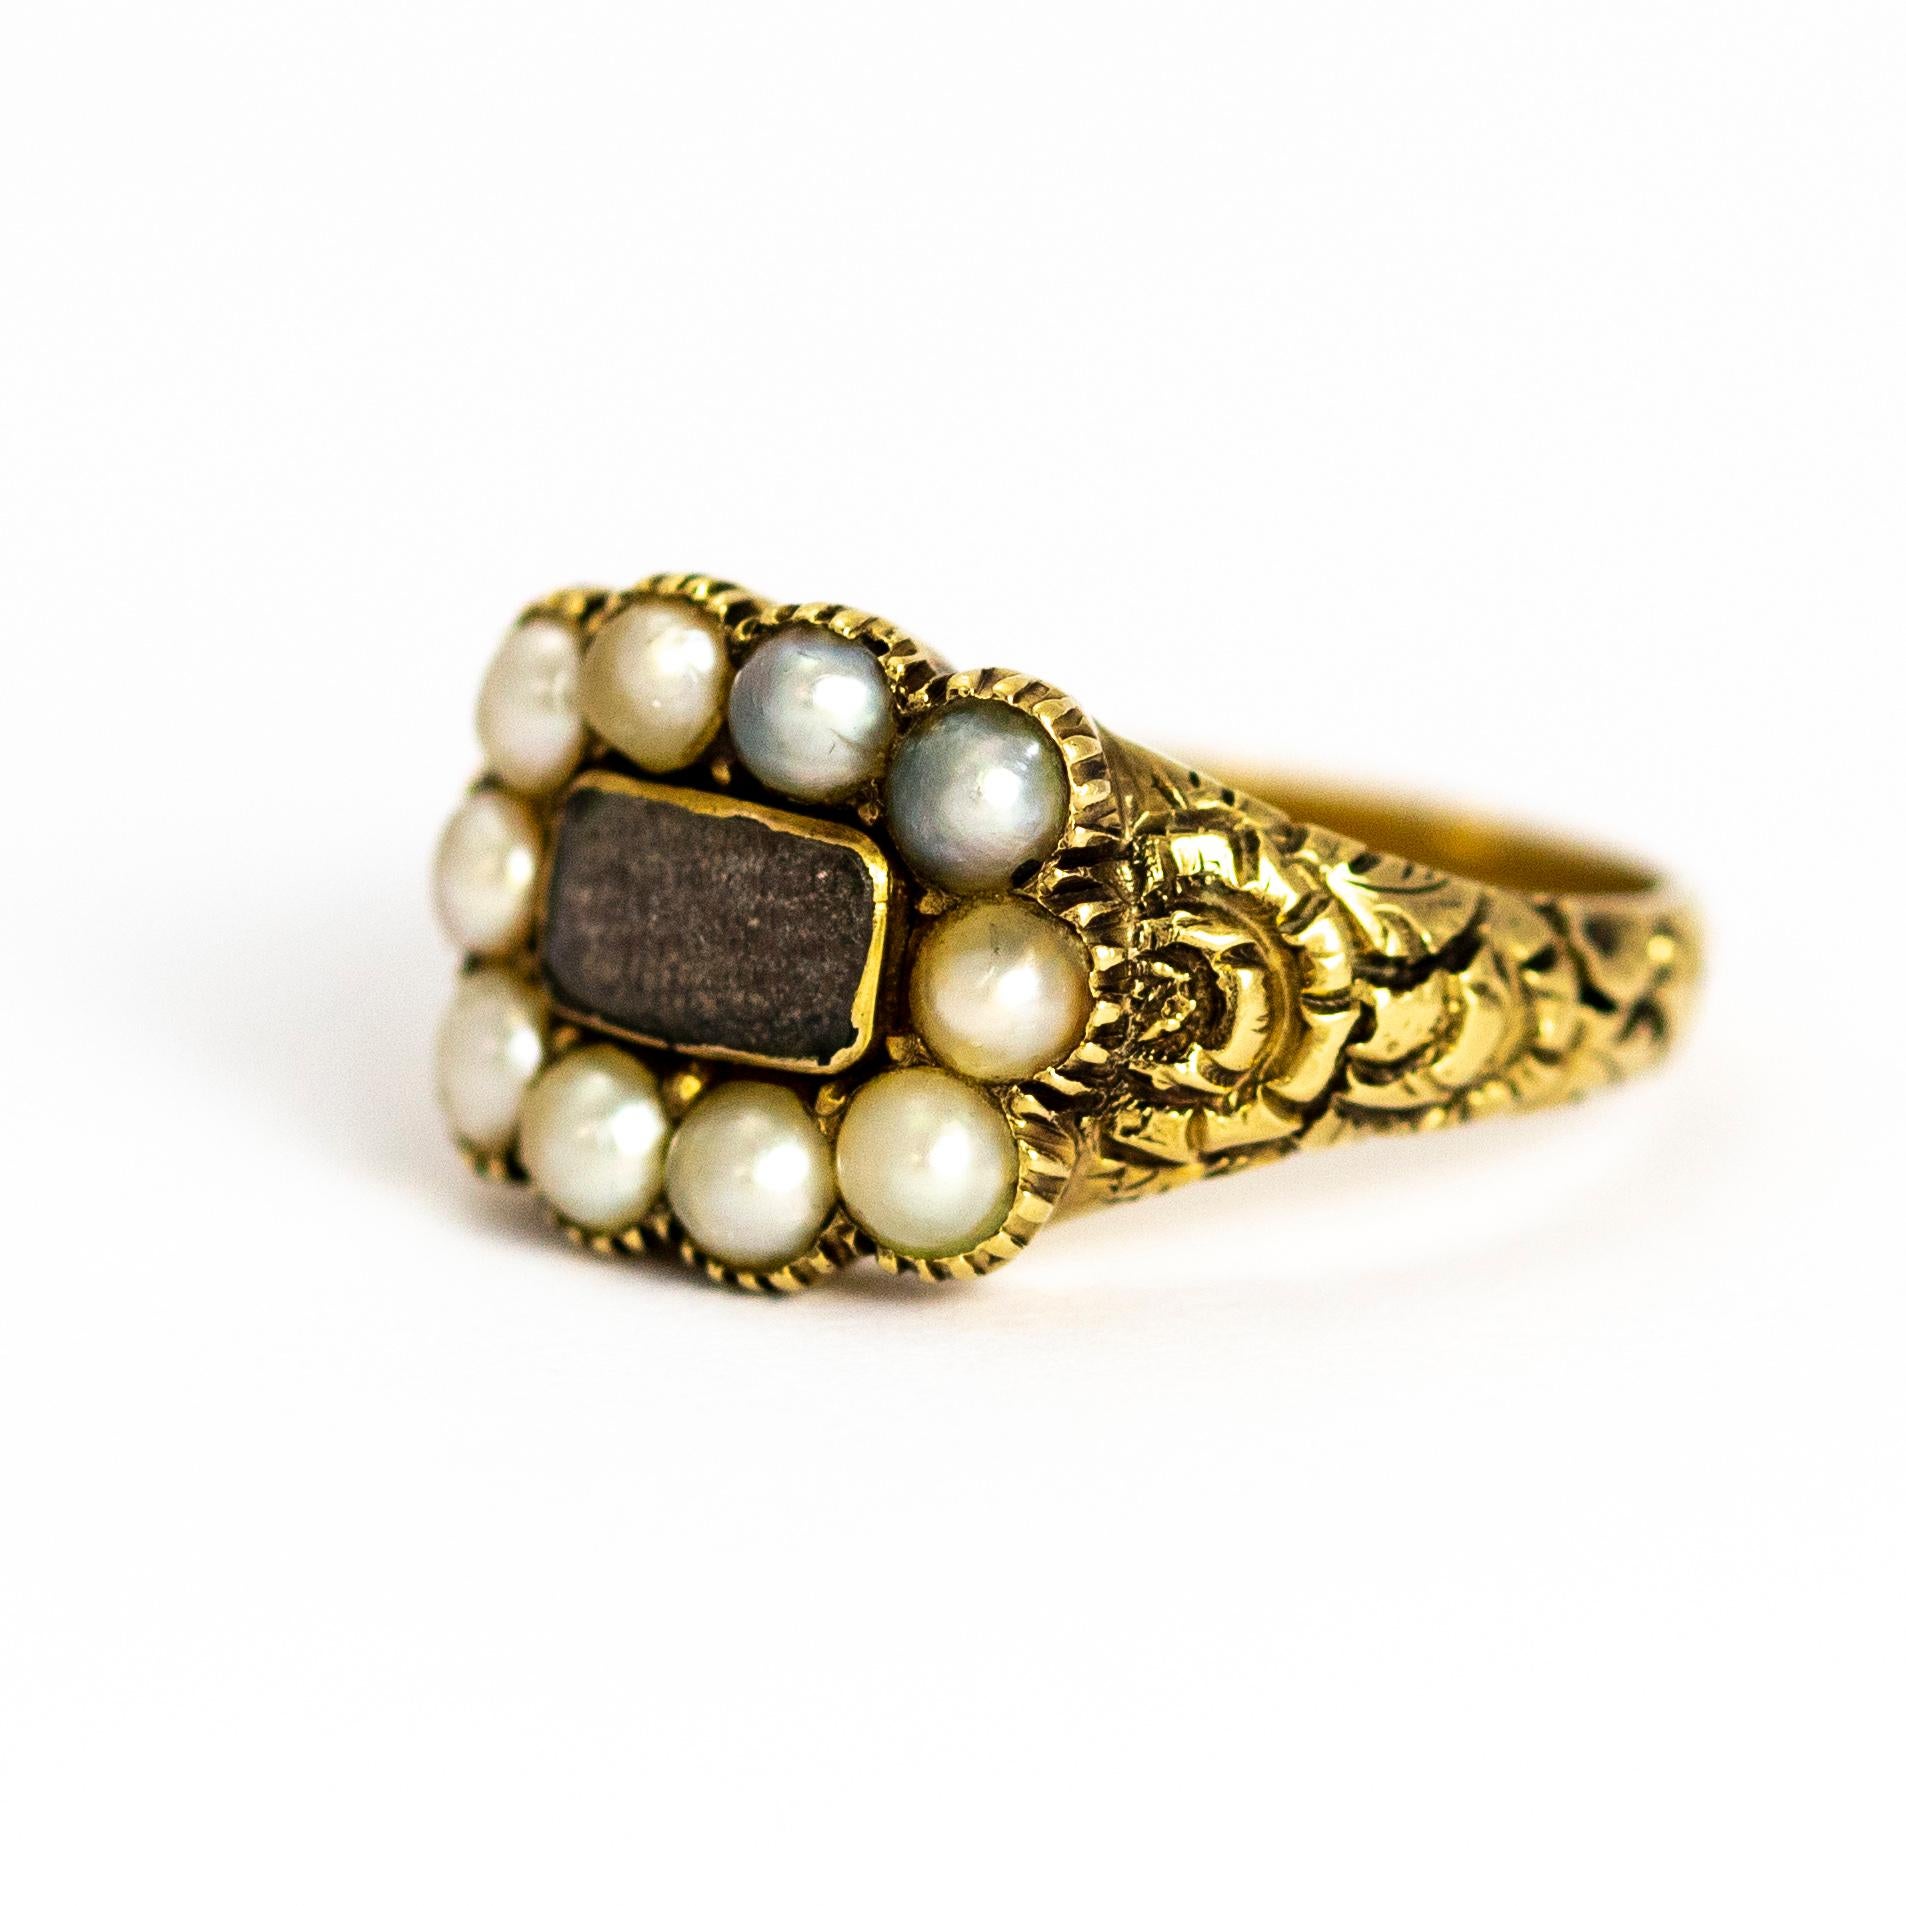 This lovely example of a late Georgian mourning ring holds a weave of hair behind crystal which sits on the most beautiful shoulders. The shoulders feature a raised flower pattern and the ring is modelled out of 9ct gold.

Ring Size: M 1/2 or 6 1/4 